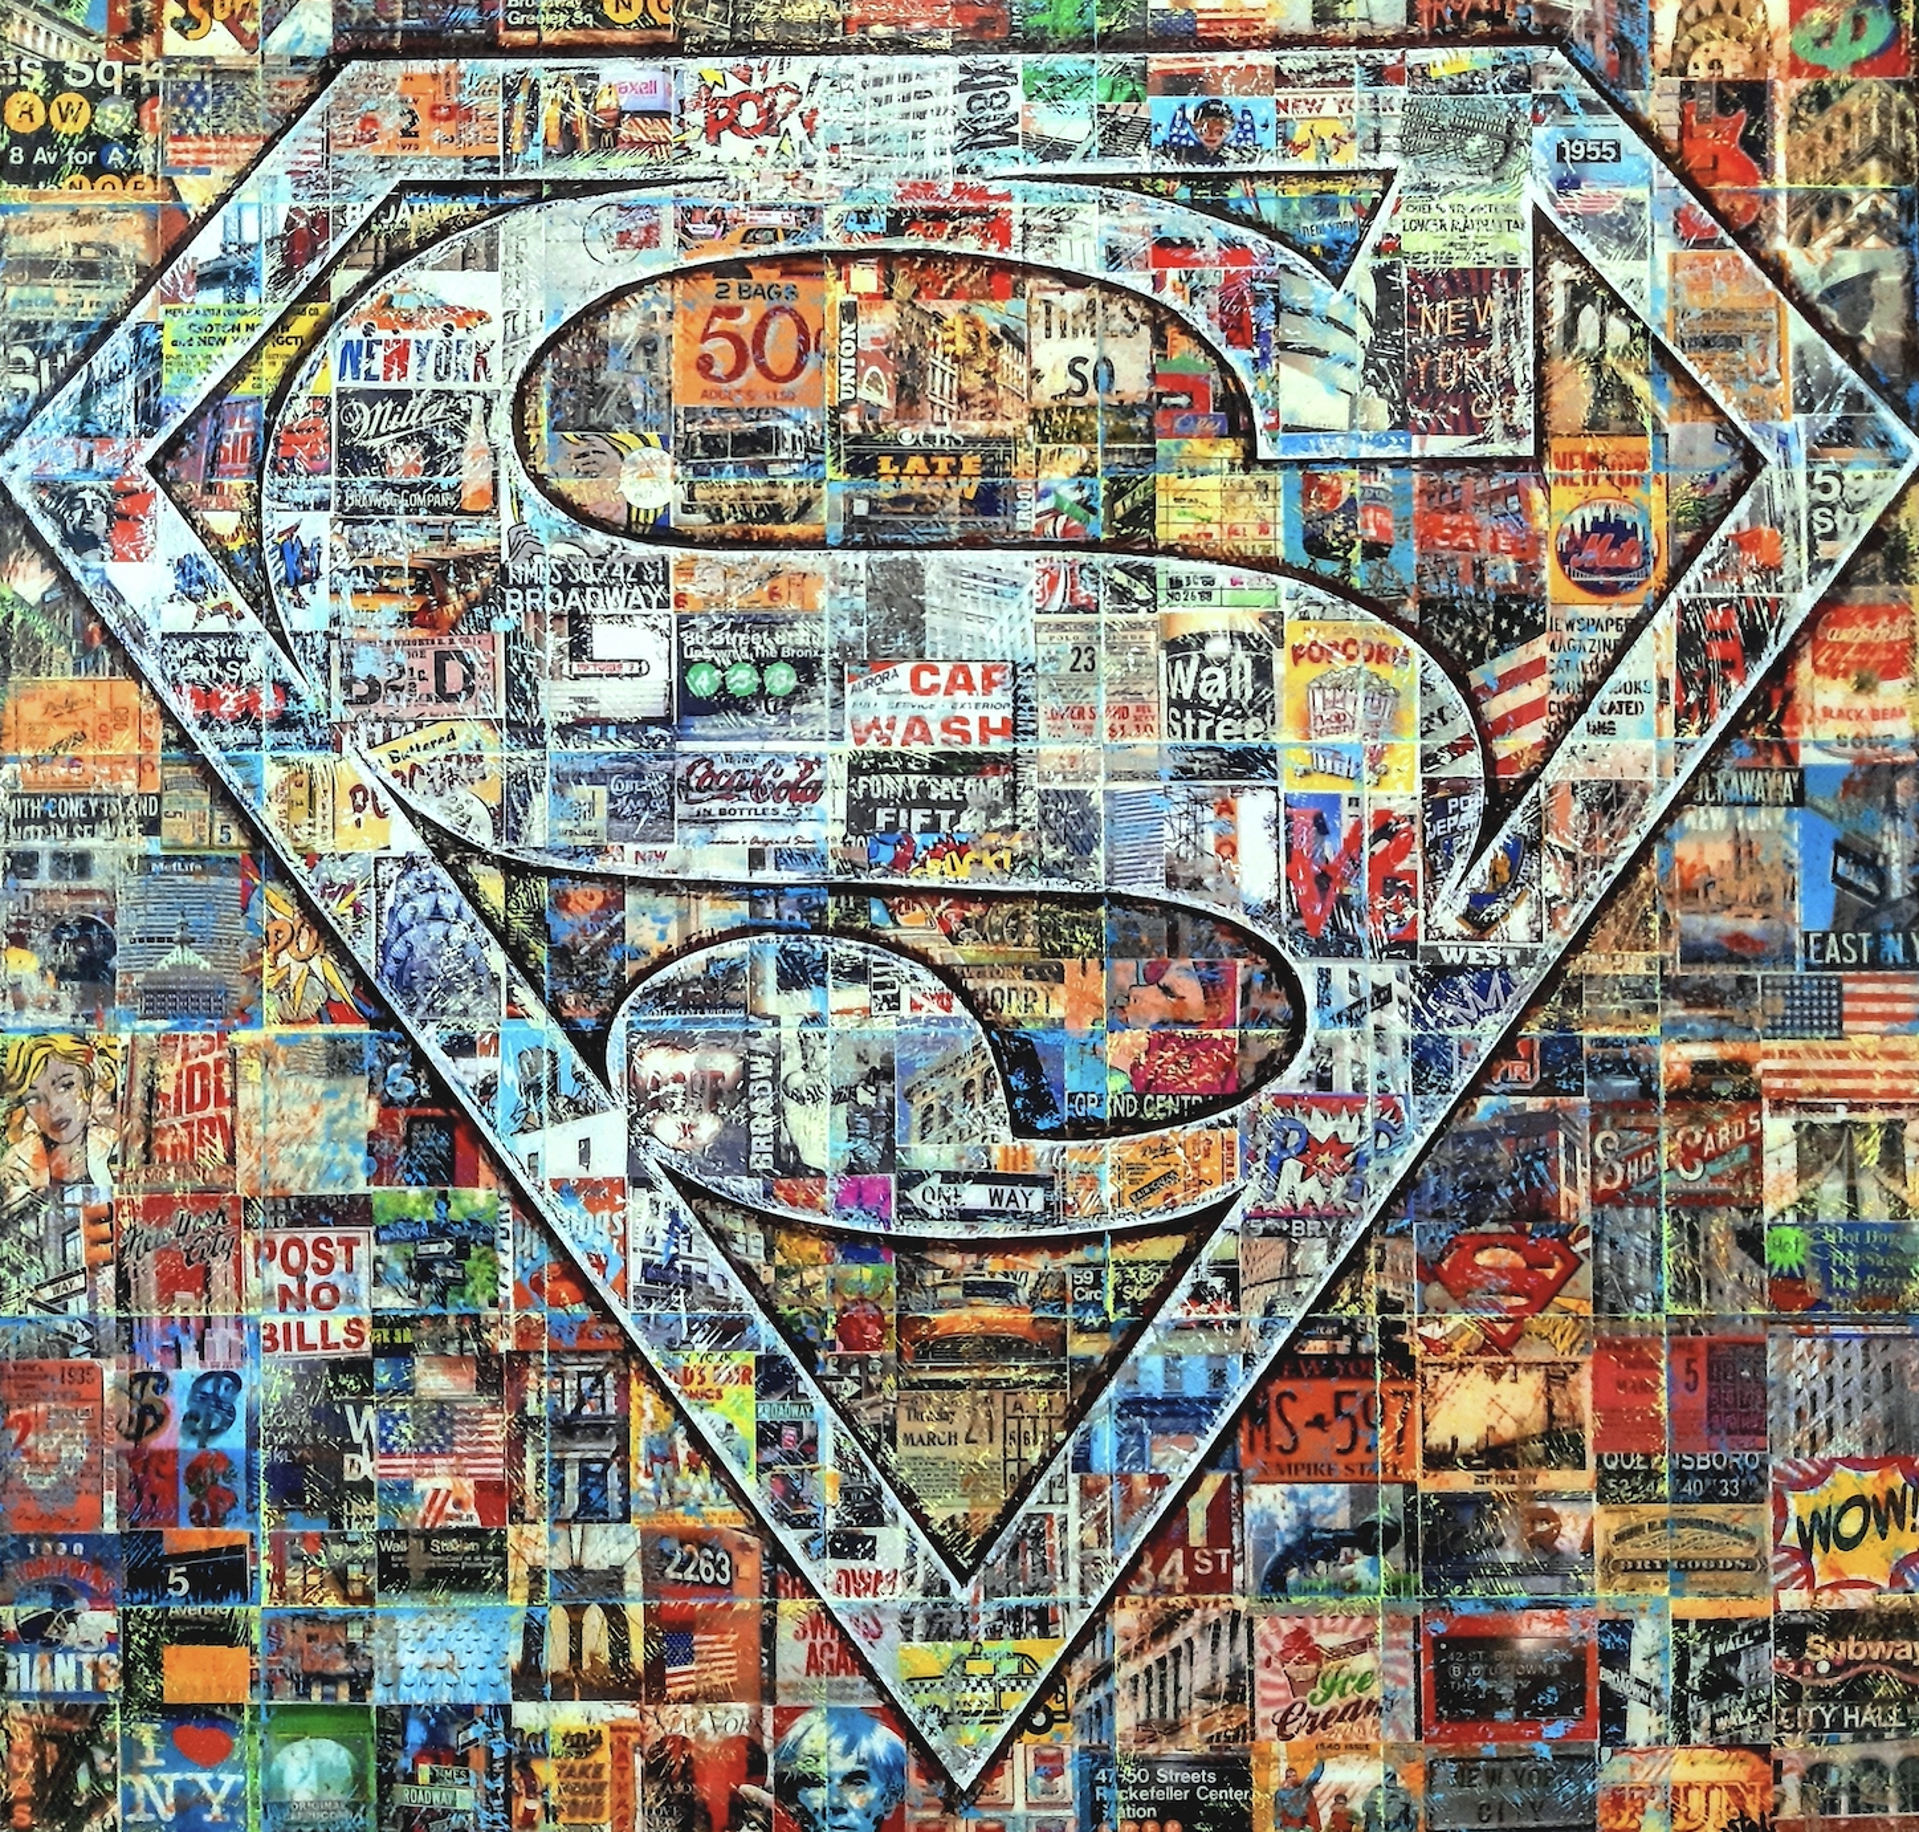 Super man lives in NYC by Steli Christoff